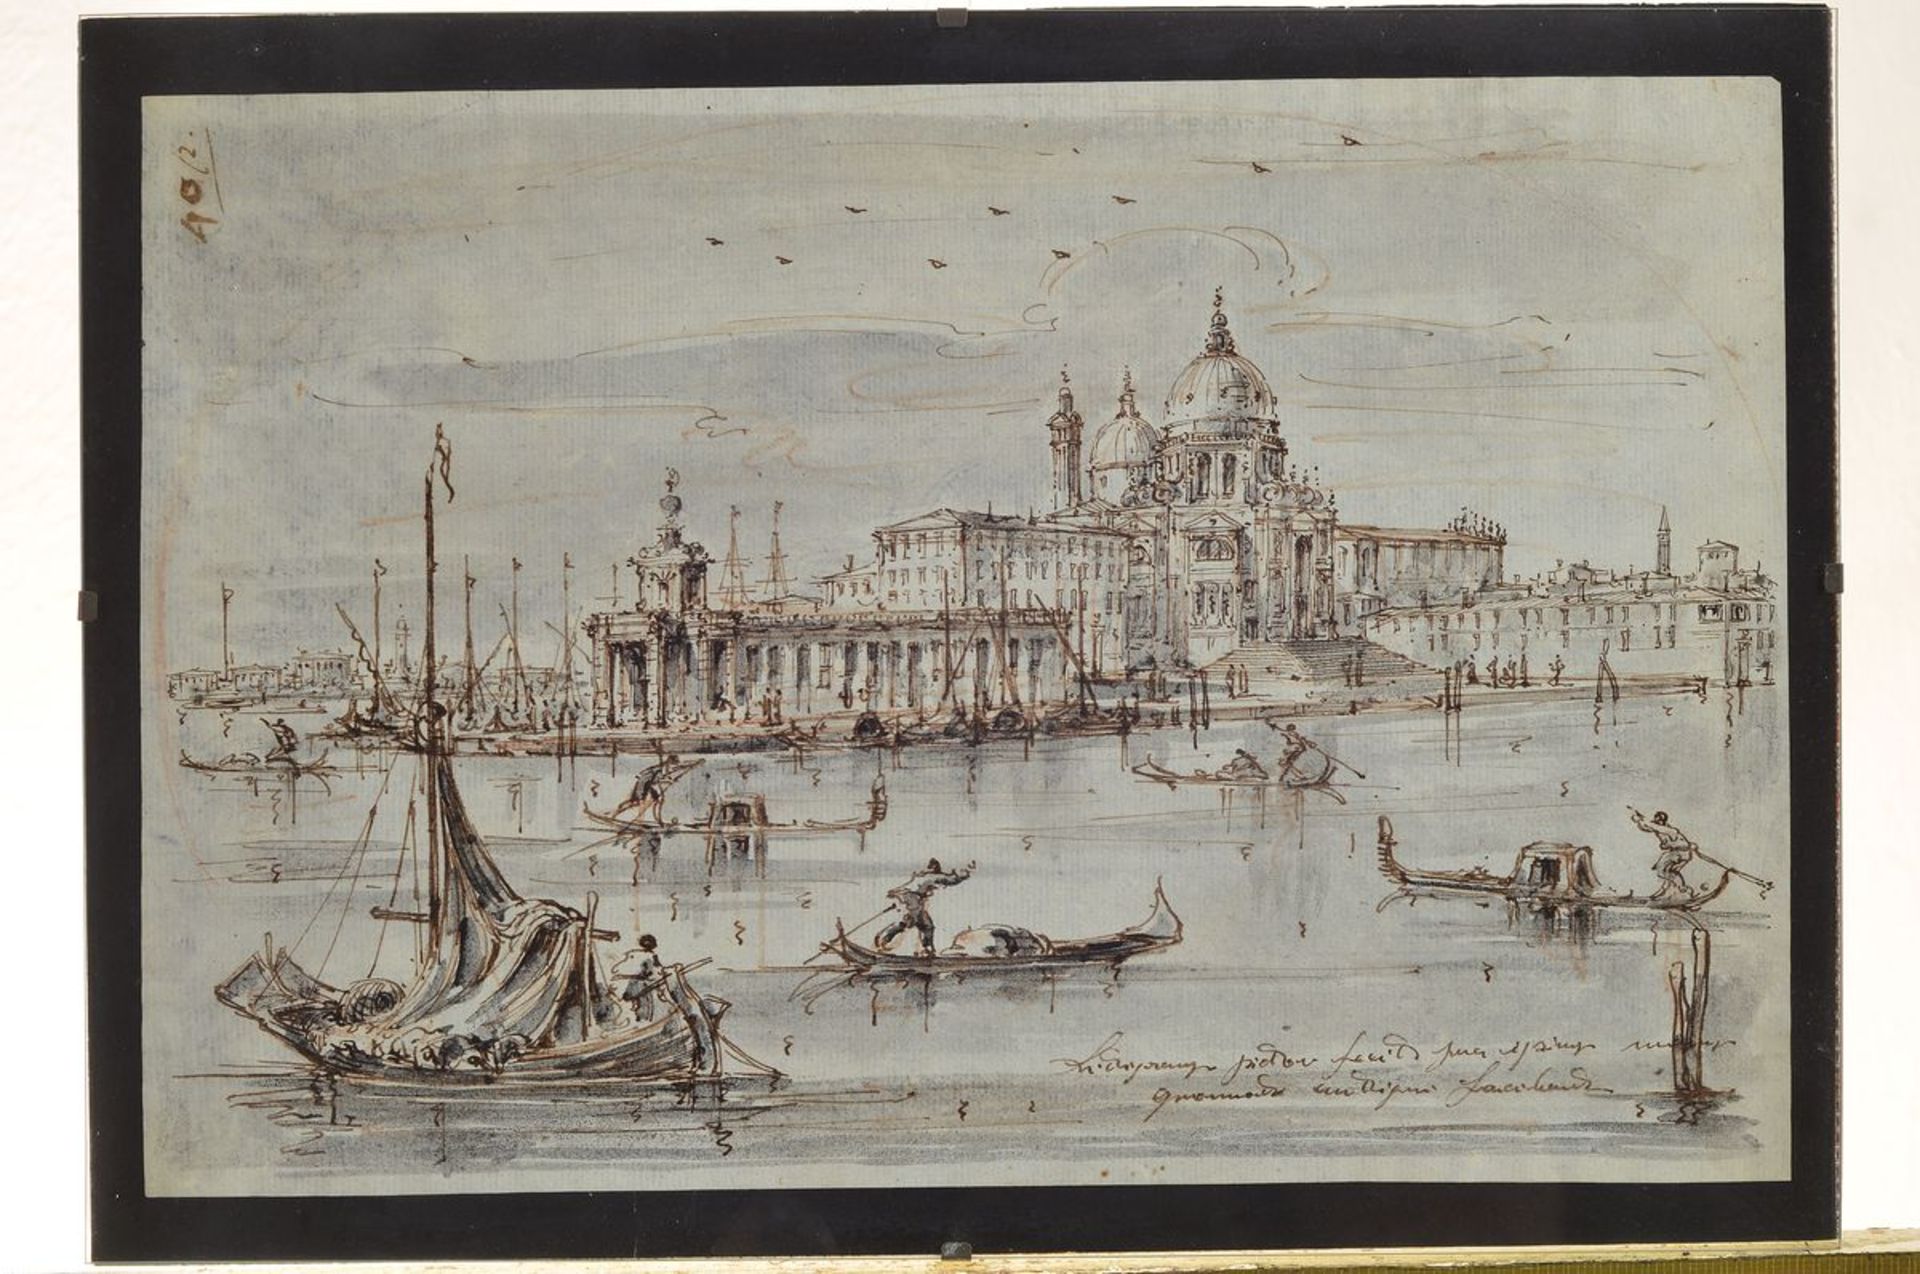 3 wash pen and ink drawings, 18th C., two views from Venice approx. 18x28cm and 20x29cm,farmstead on - Image 6 of 6